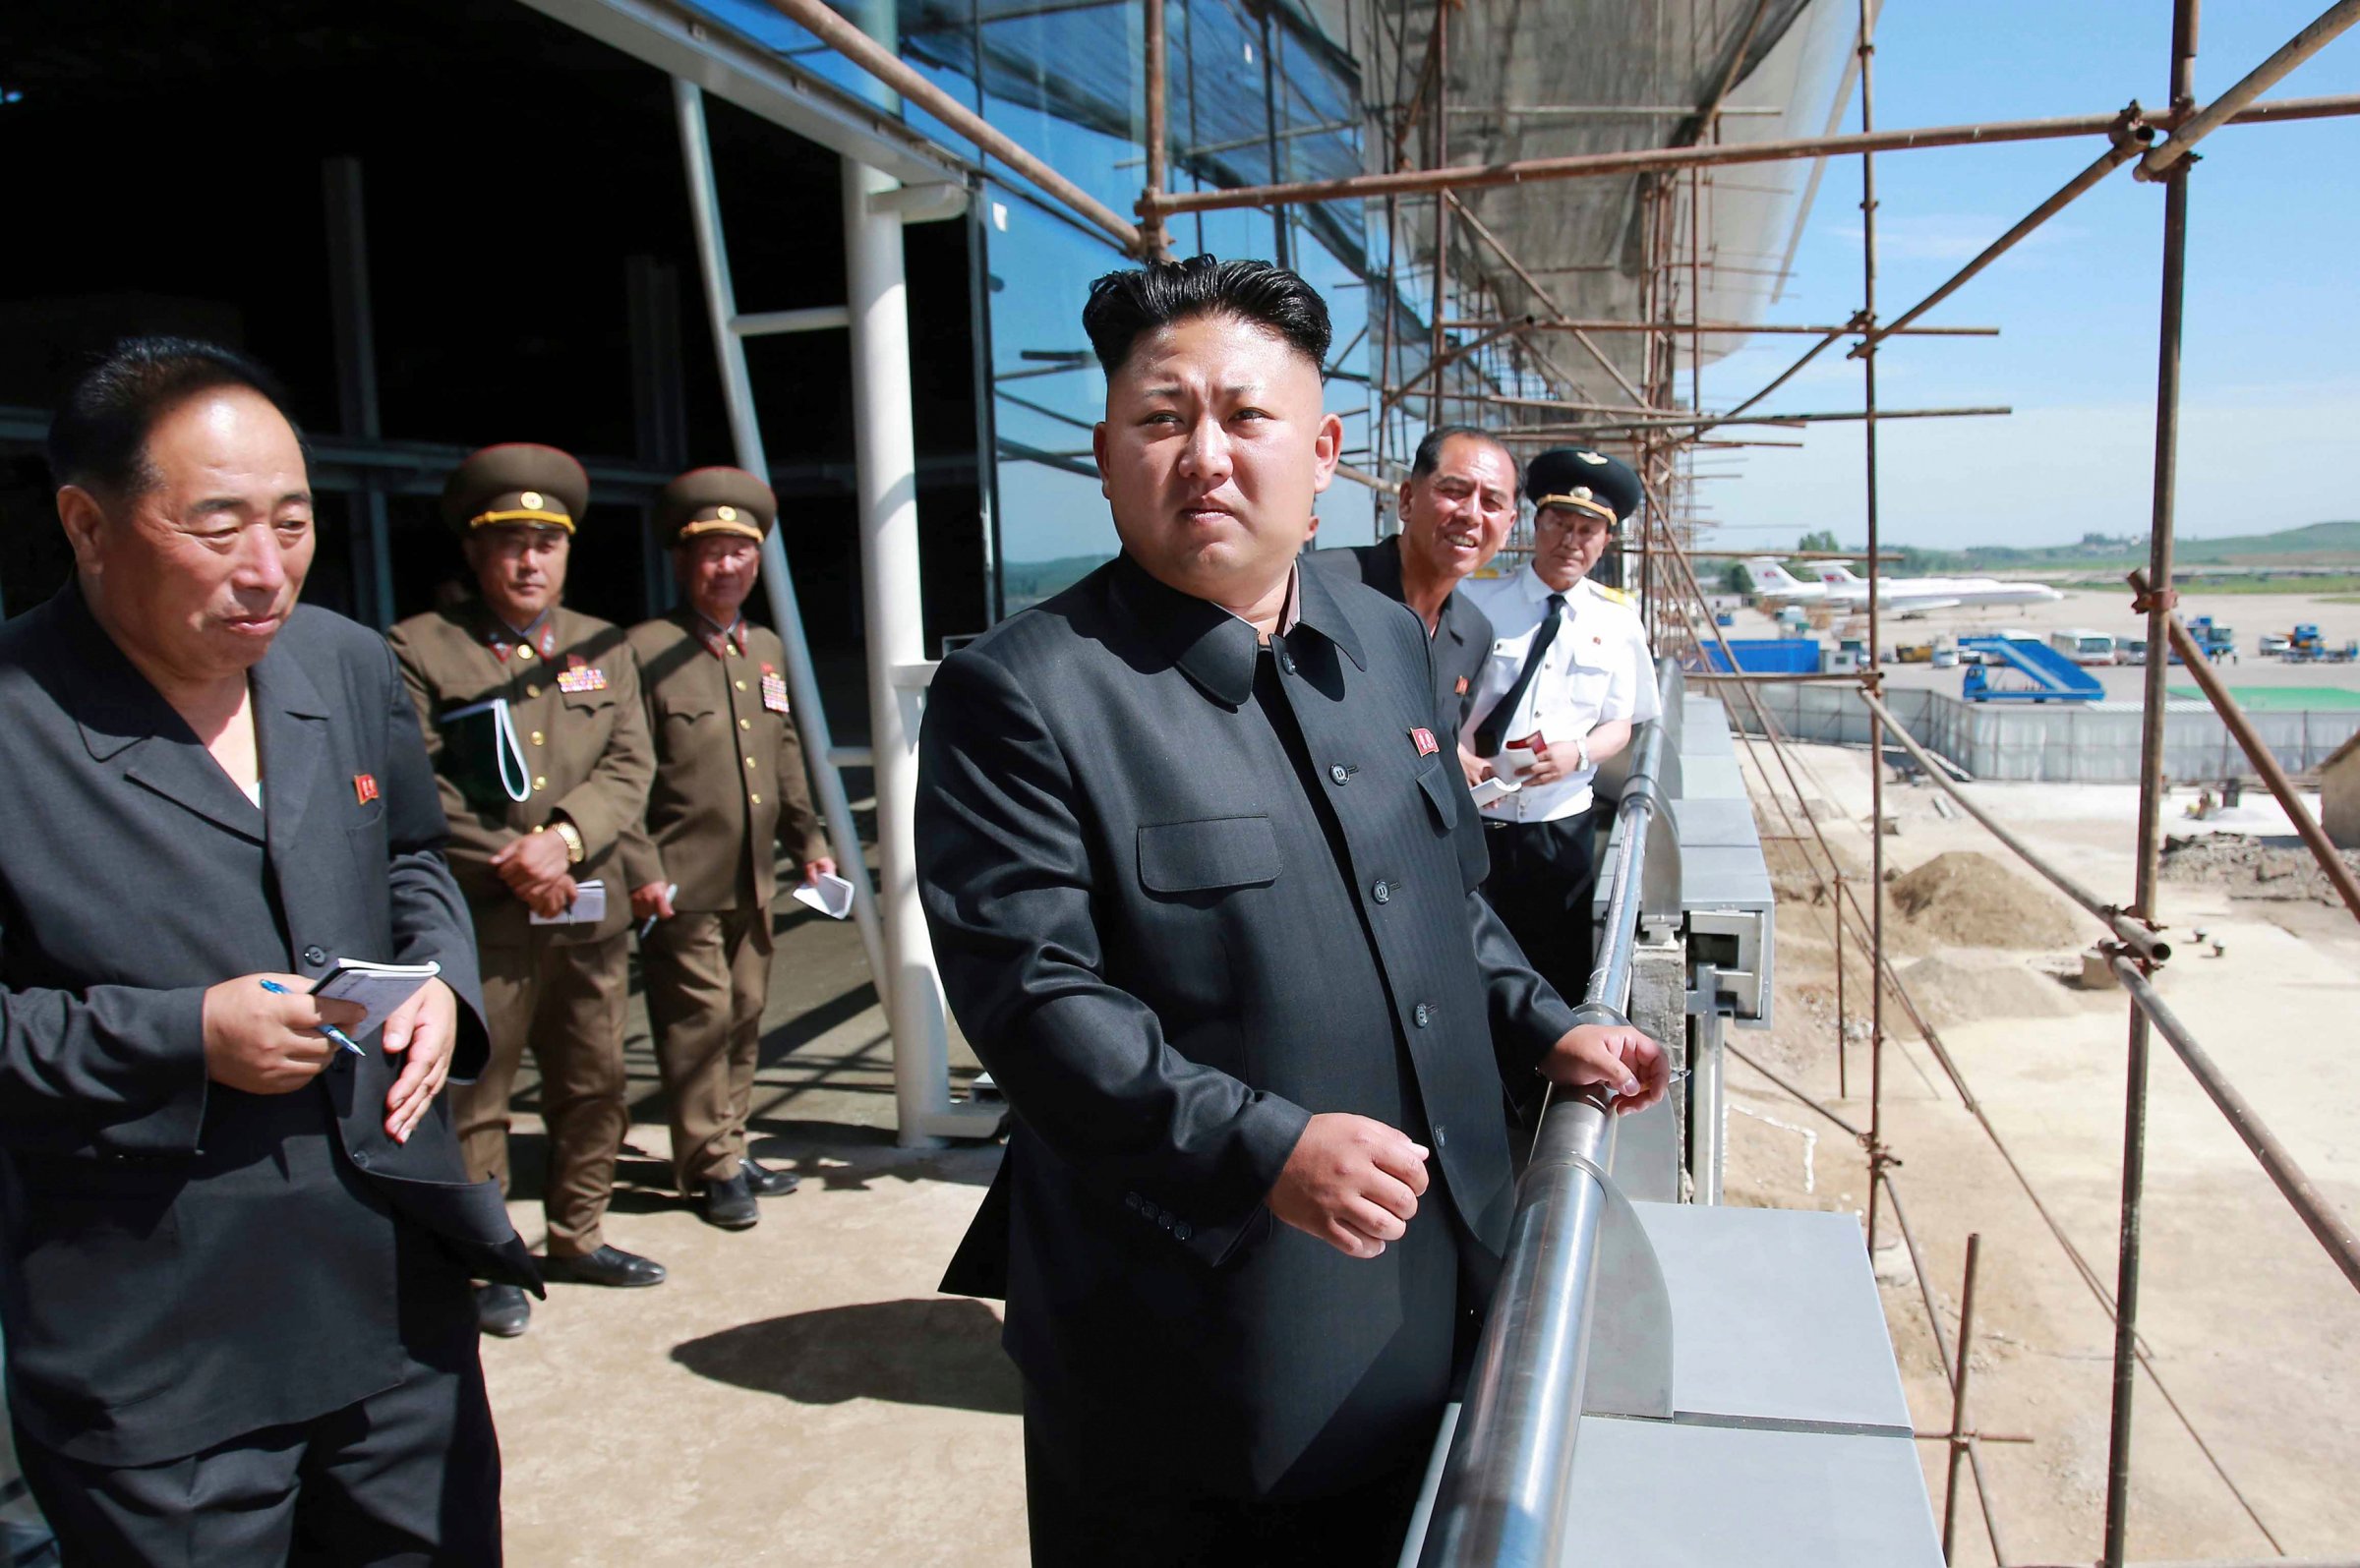 KCNA picture shows North Korean leader Kim Jong Un during a visit to the construction site of a terminal at Pyongyang International Airport